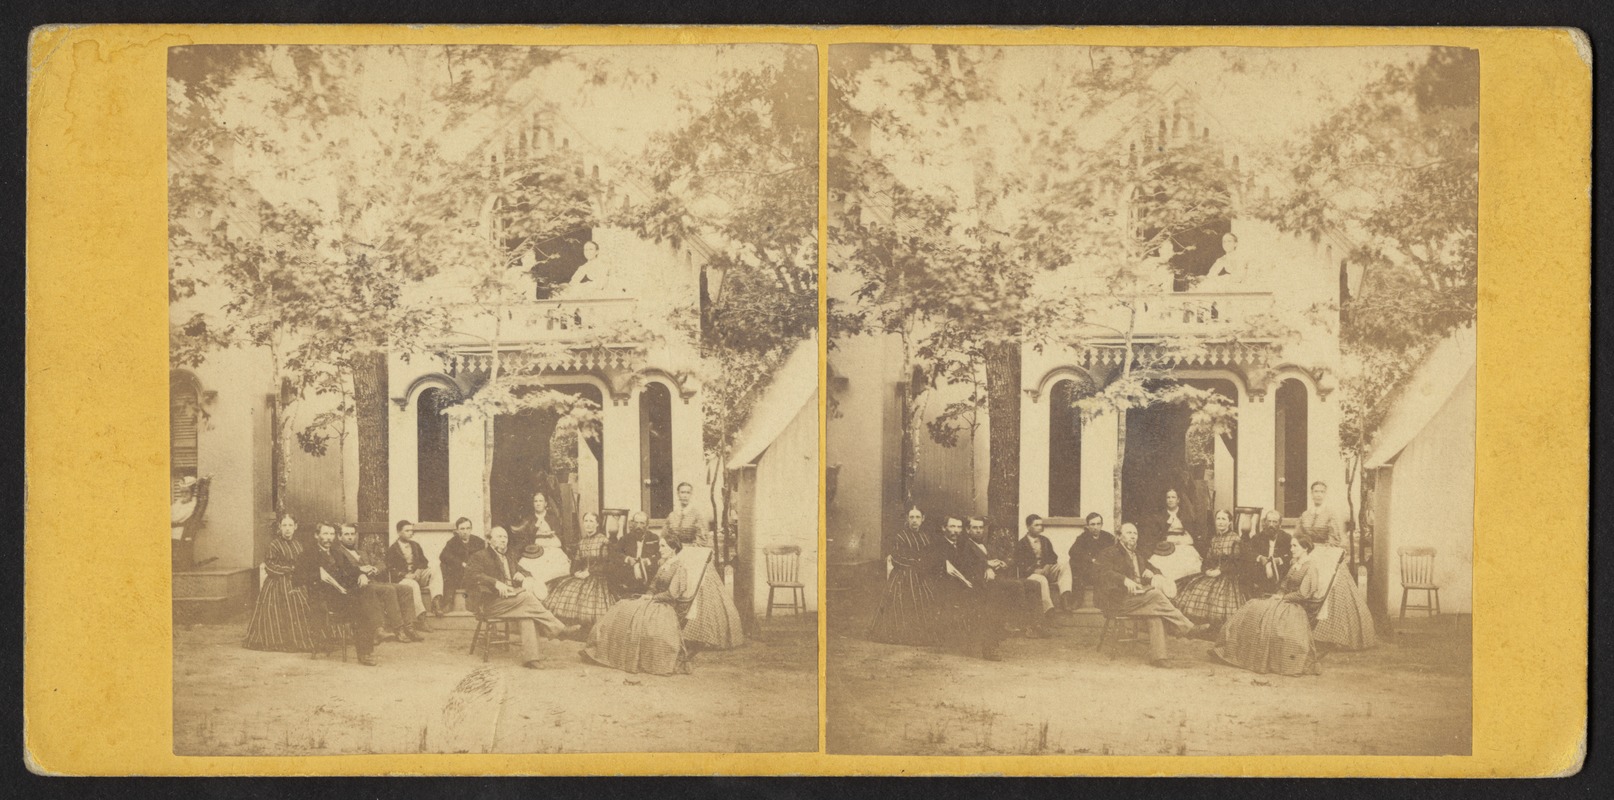 Group of people pose for photograph outside of a cottage on Martha's Vineyard